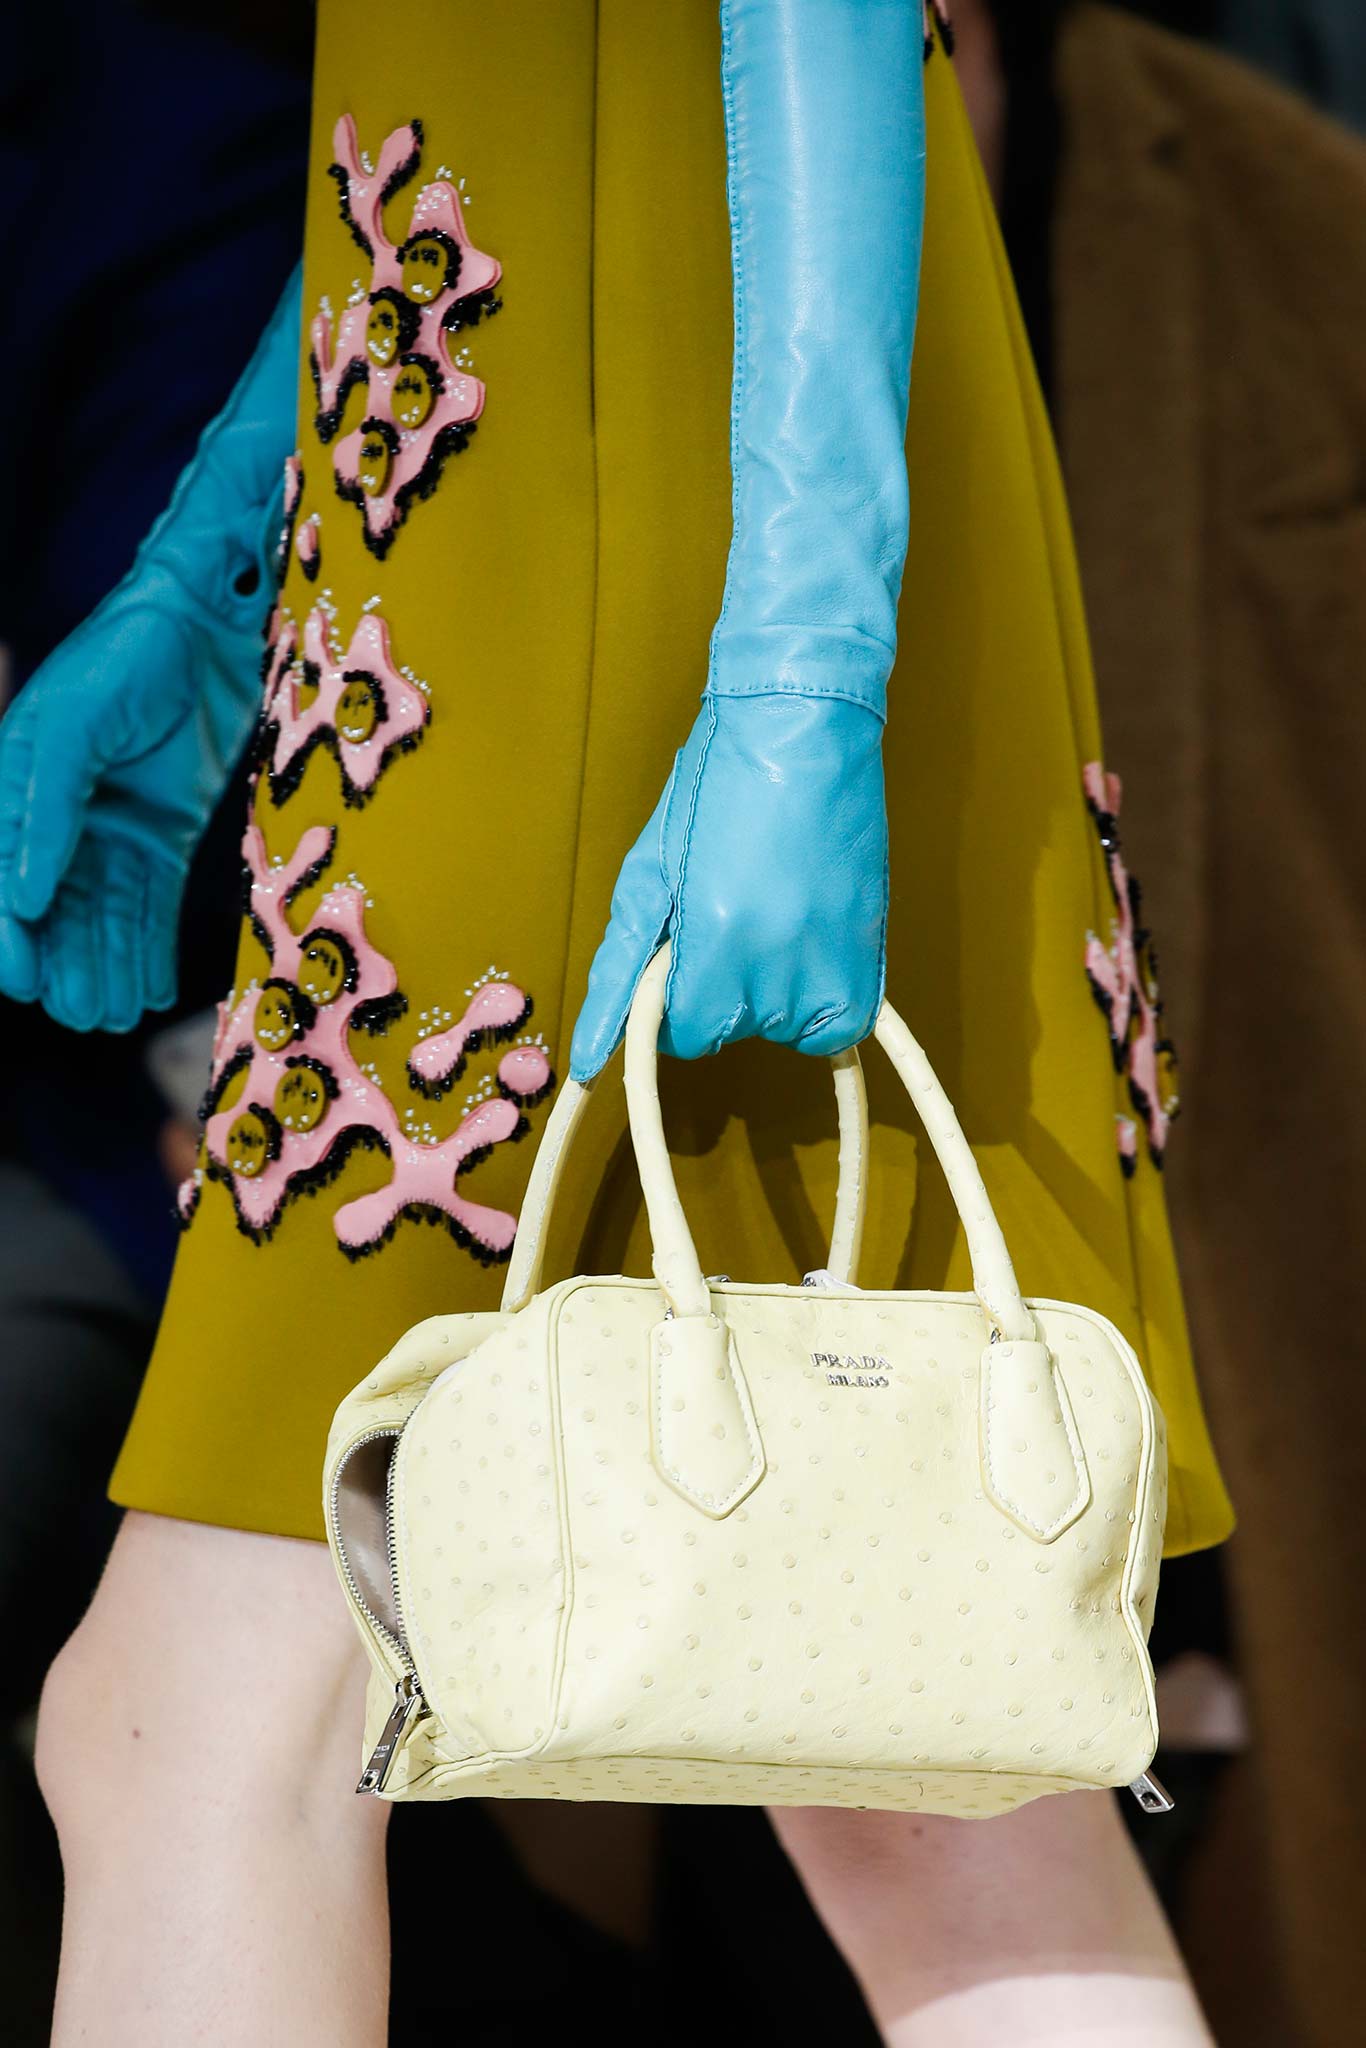 Prada Fall/Winter 2015 Runway Bag Collection Featuring Pastel Colors ...